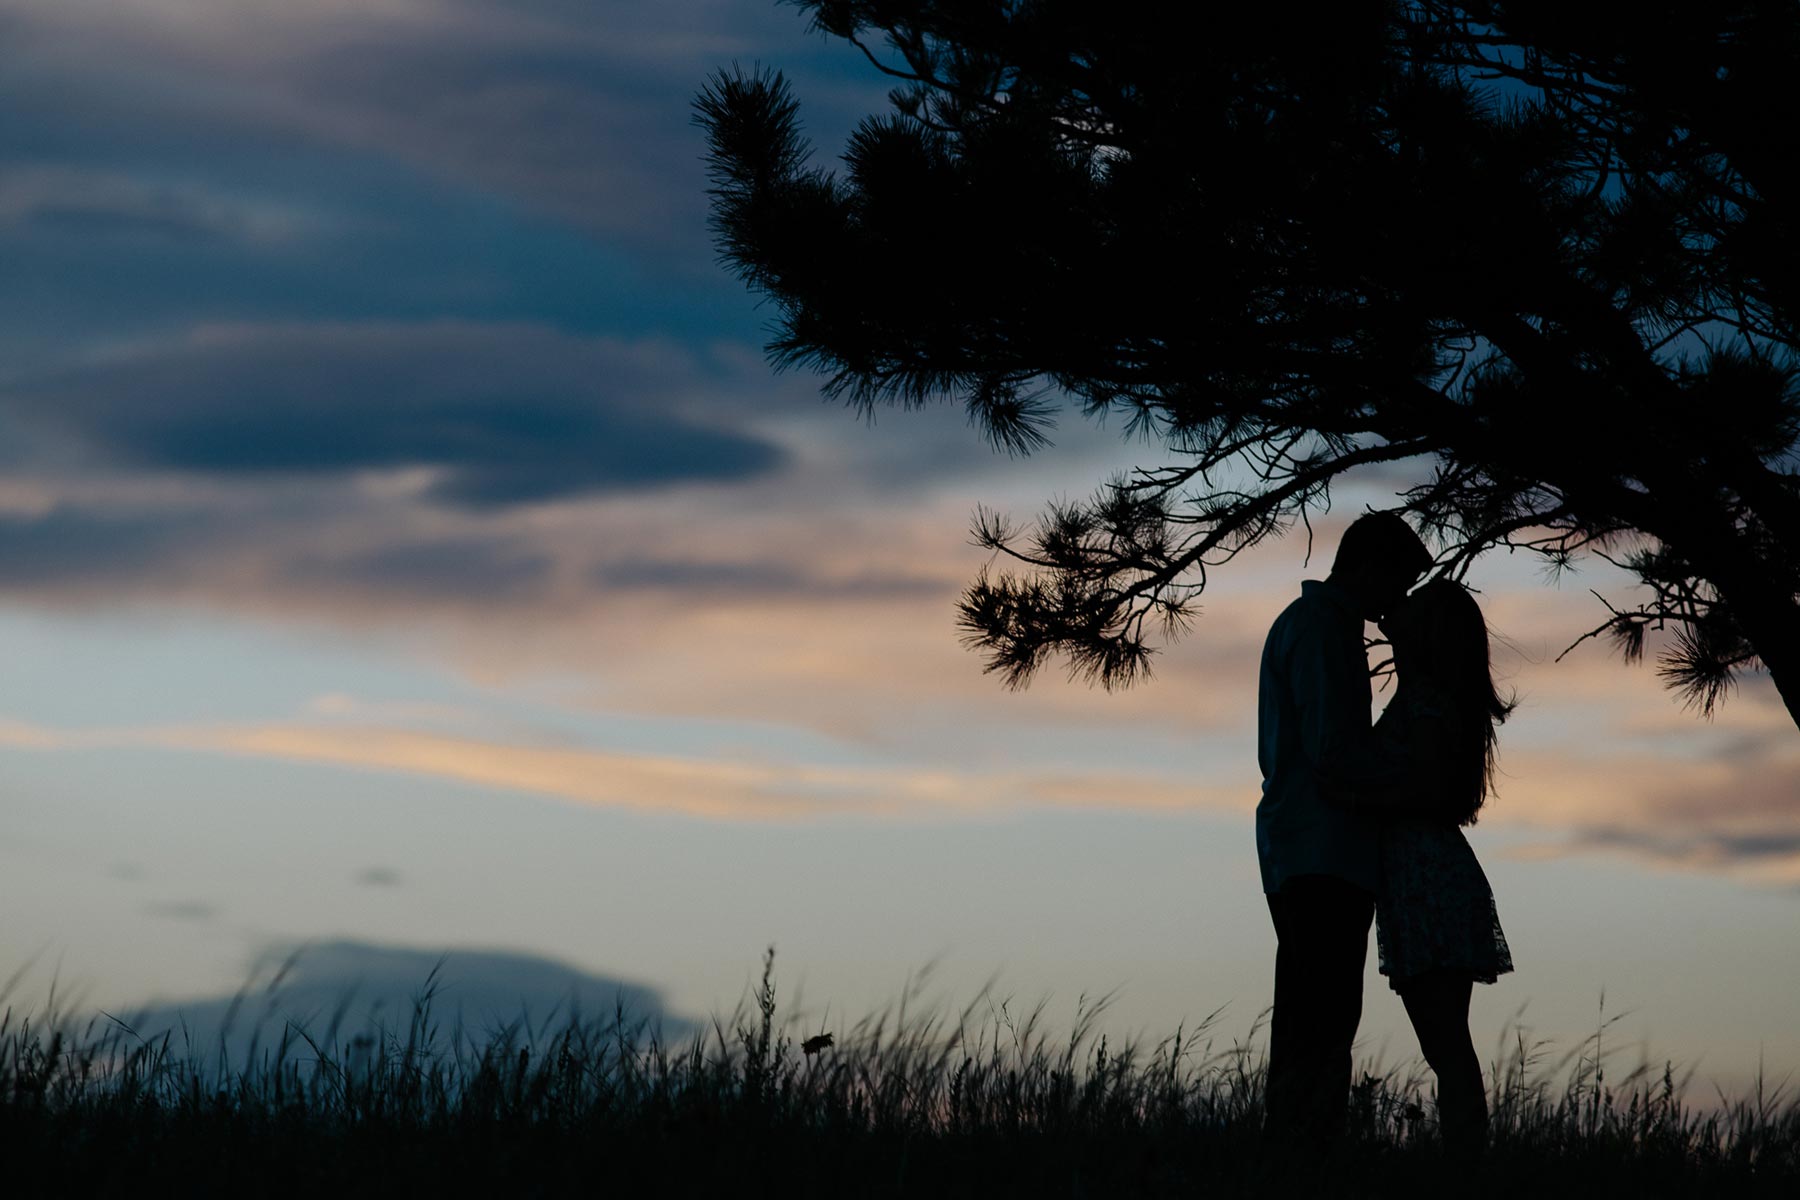 Irivng-Photography-Kerstyn-Korby-Colorado-Engagement-Photographers-024